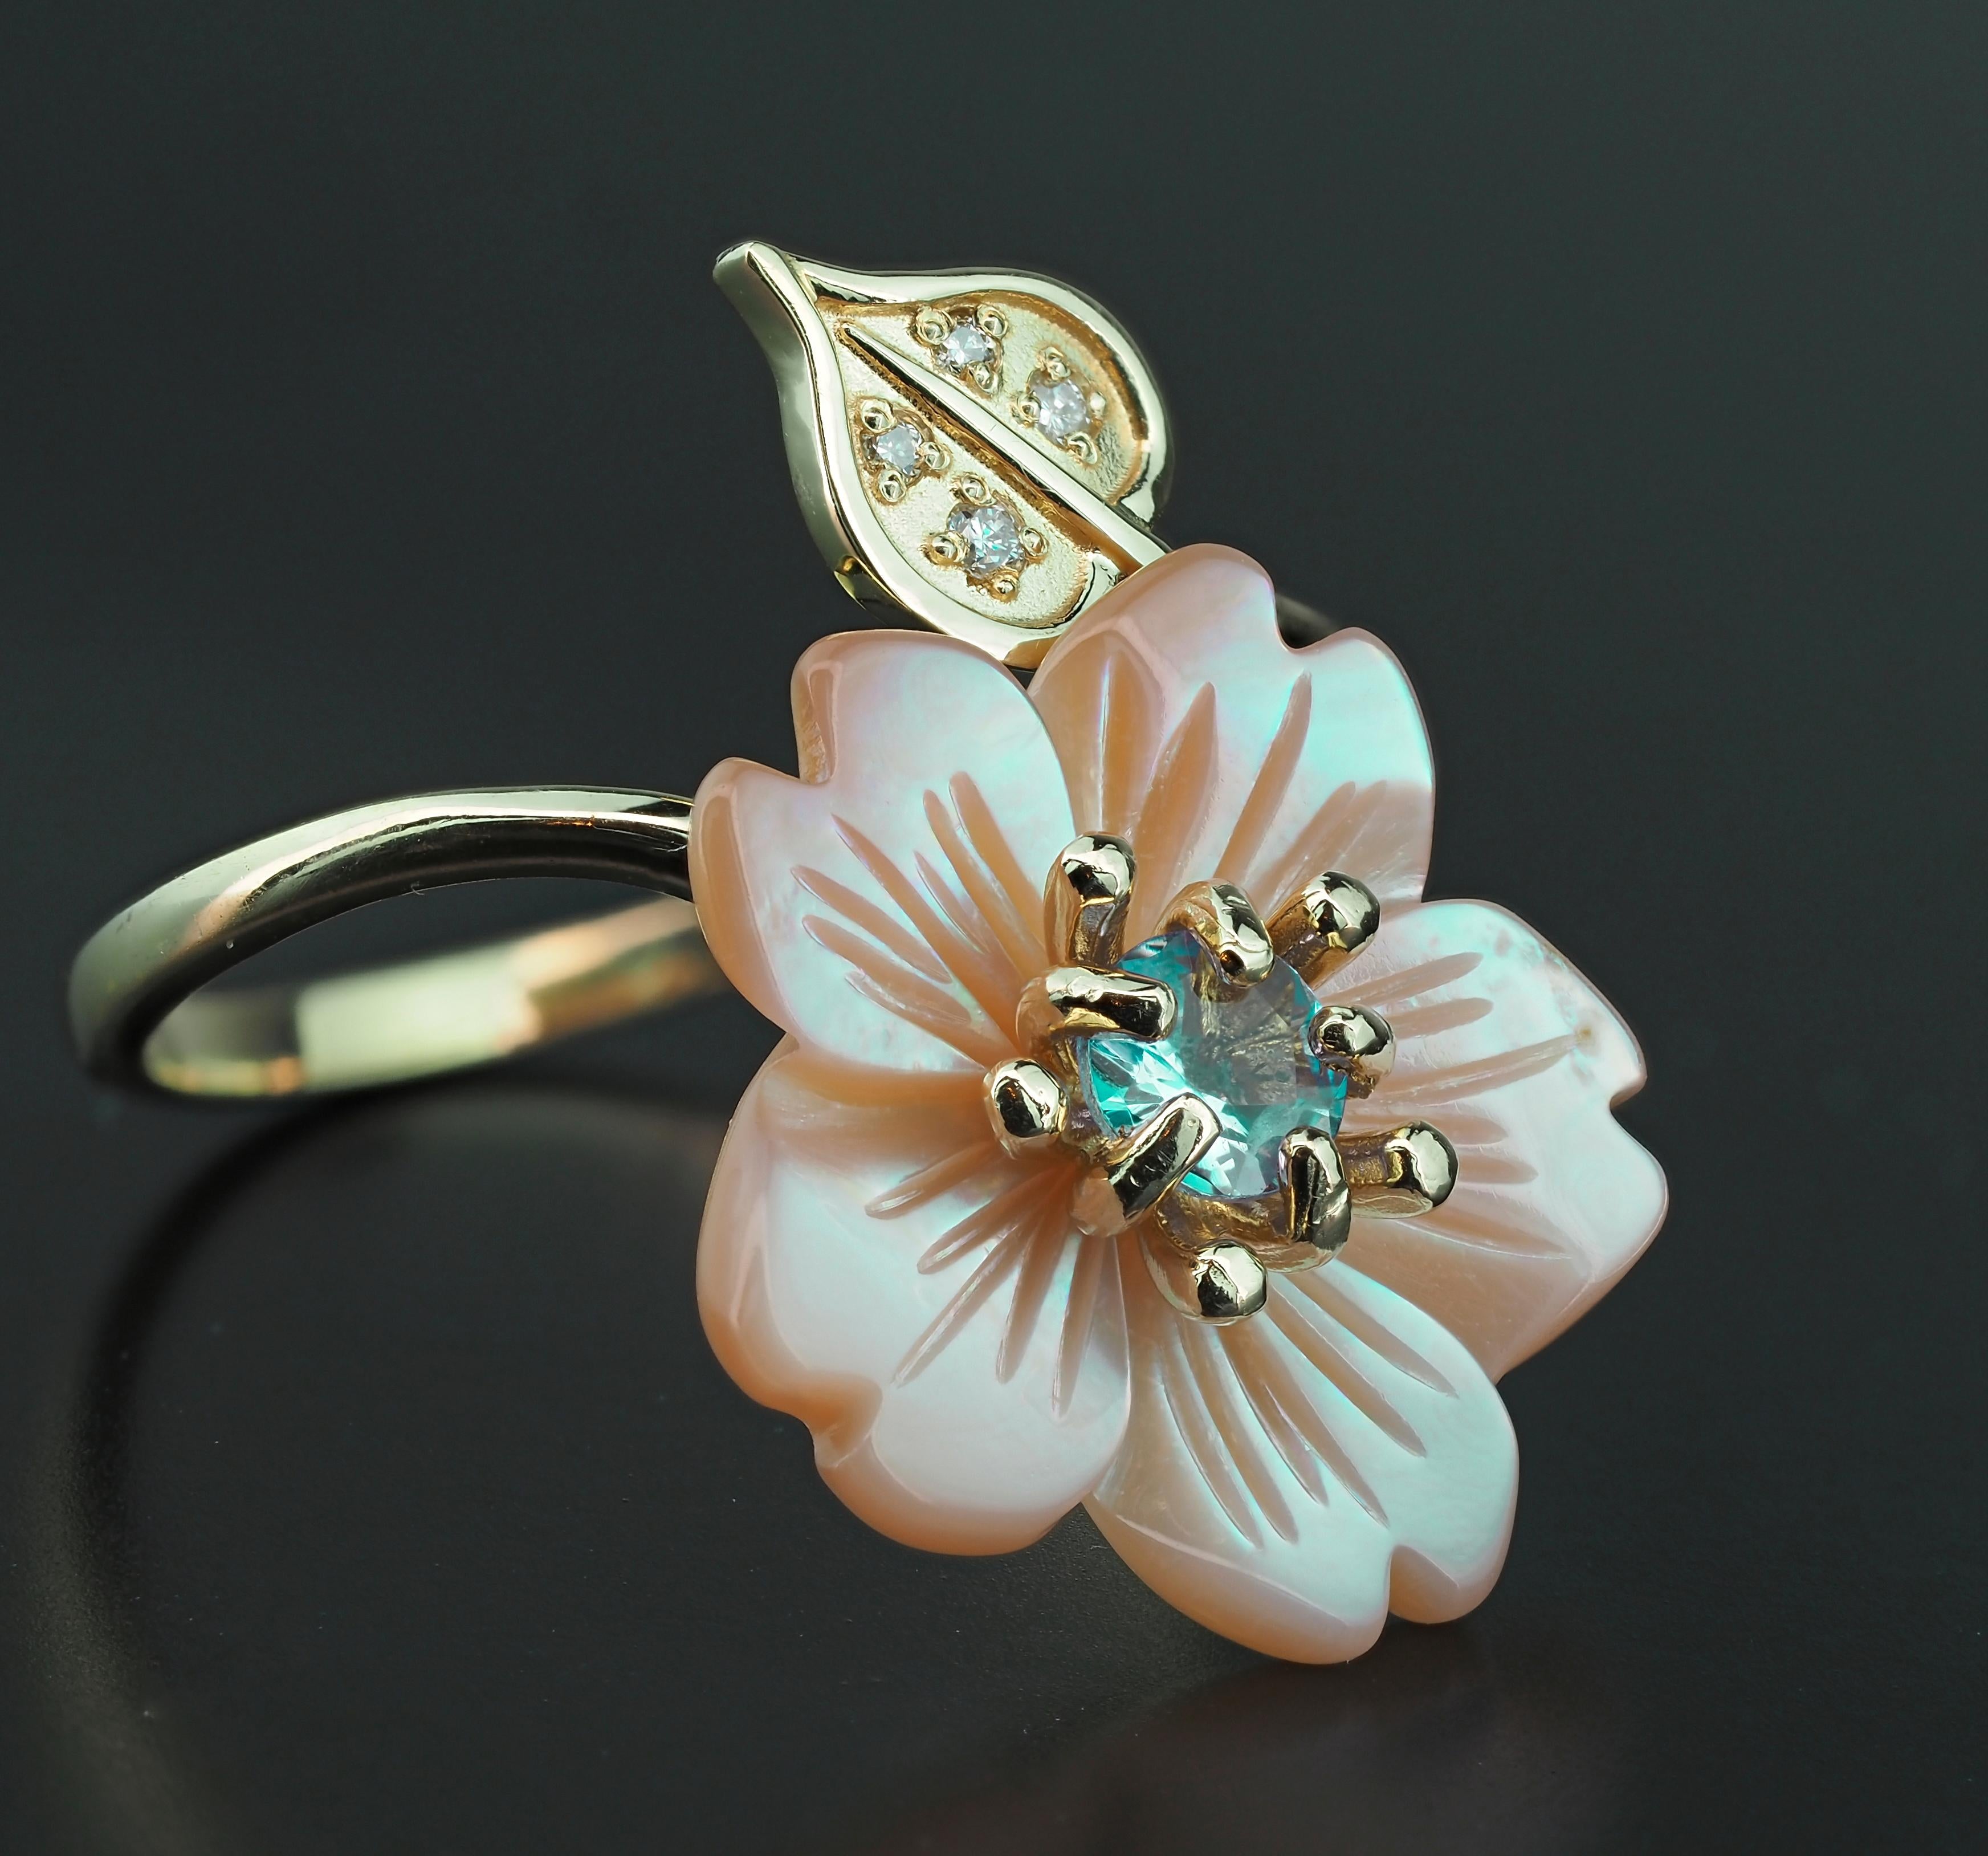 Carved Flower 14k ring with gemstones.
Lab tourmaline paraiba color ring in 14k gold. Carved mother of pearl flower ring. Flower gold ring. Tourmaline vintage ring. Nature inspired ring with mother of pearl flower. Shell flower ring.

Metal: 14k